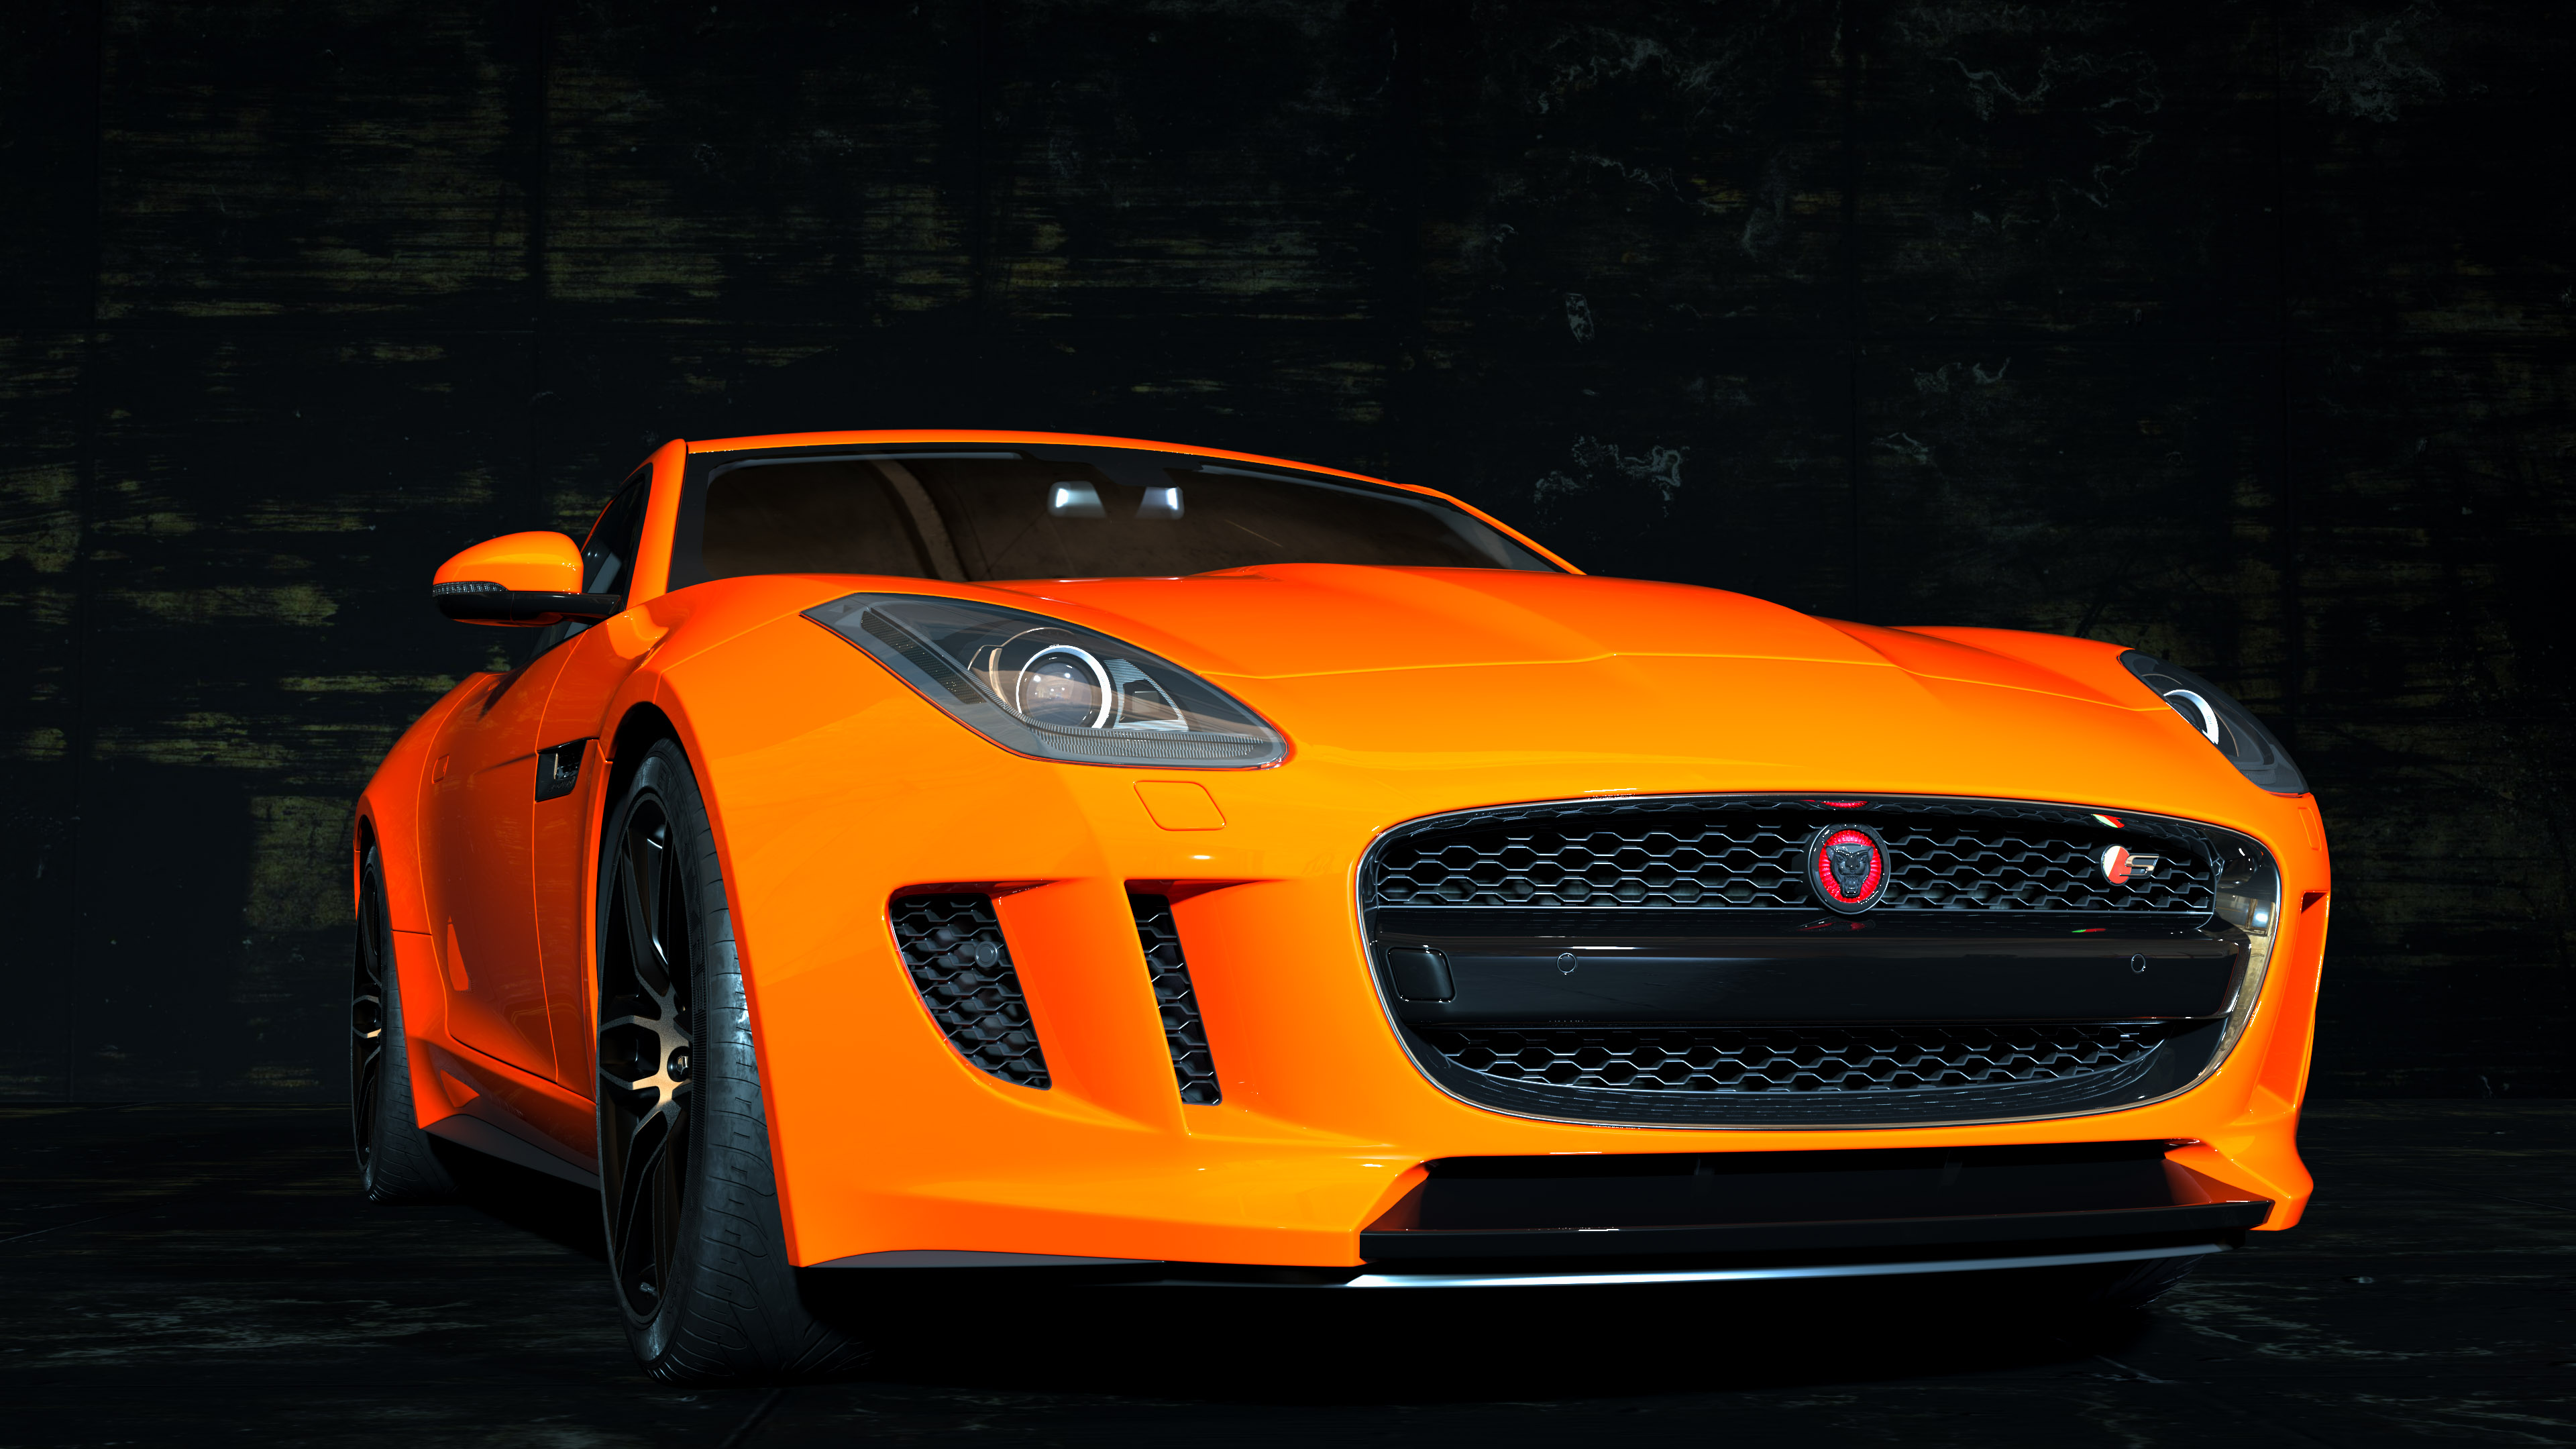 Savor the elegance of the orange Jaguar F-Type with our car wallpaper, a symbol of British luxury and design.